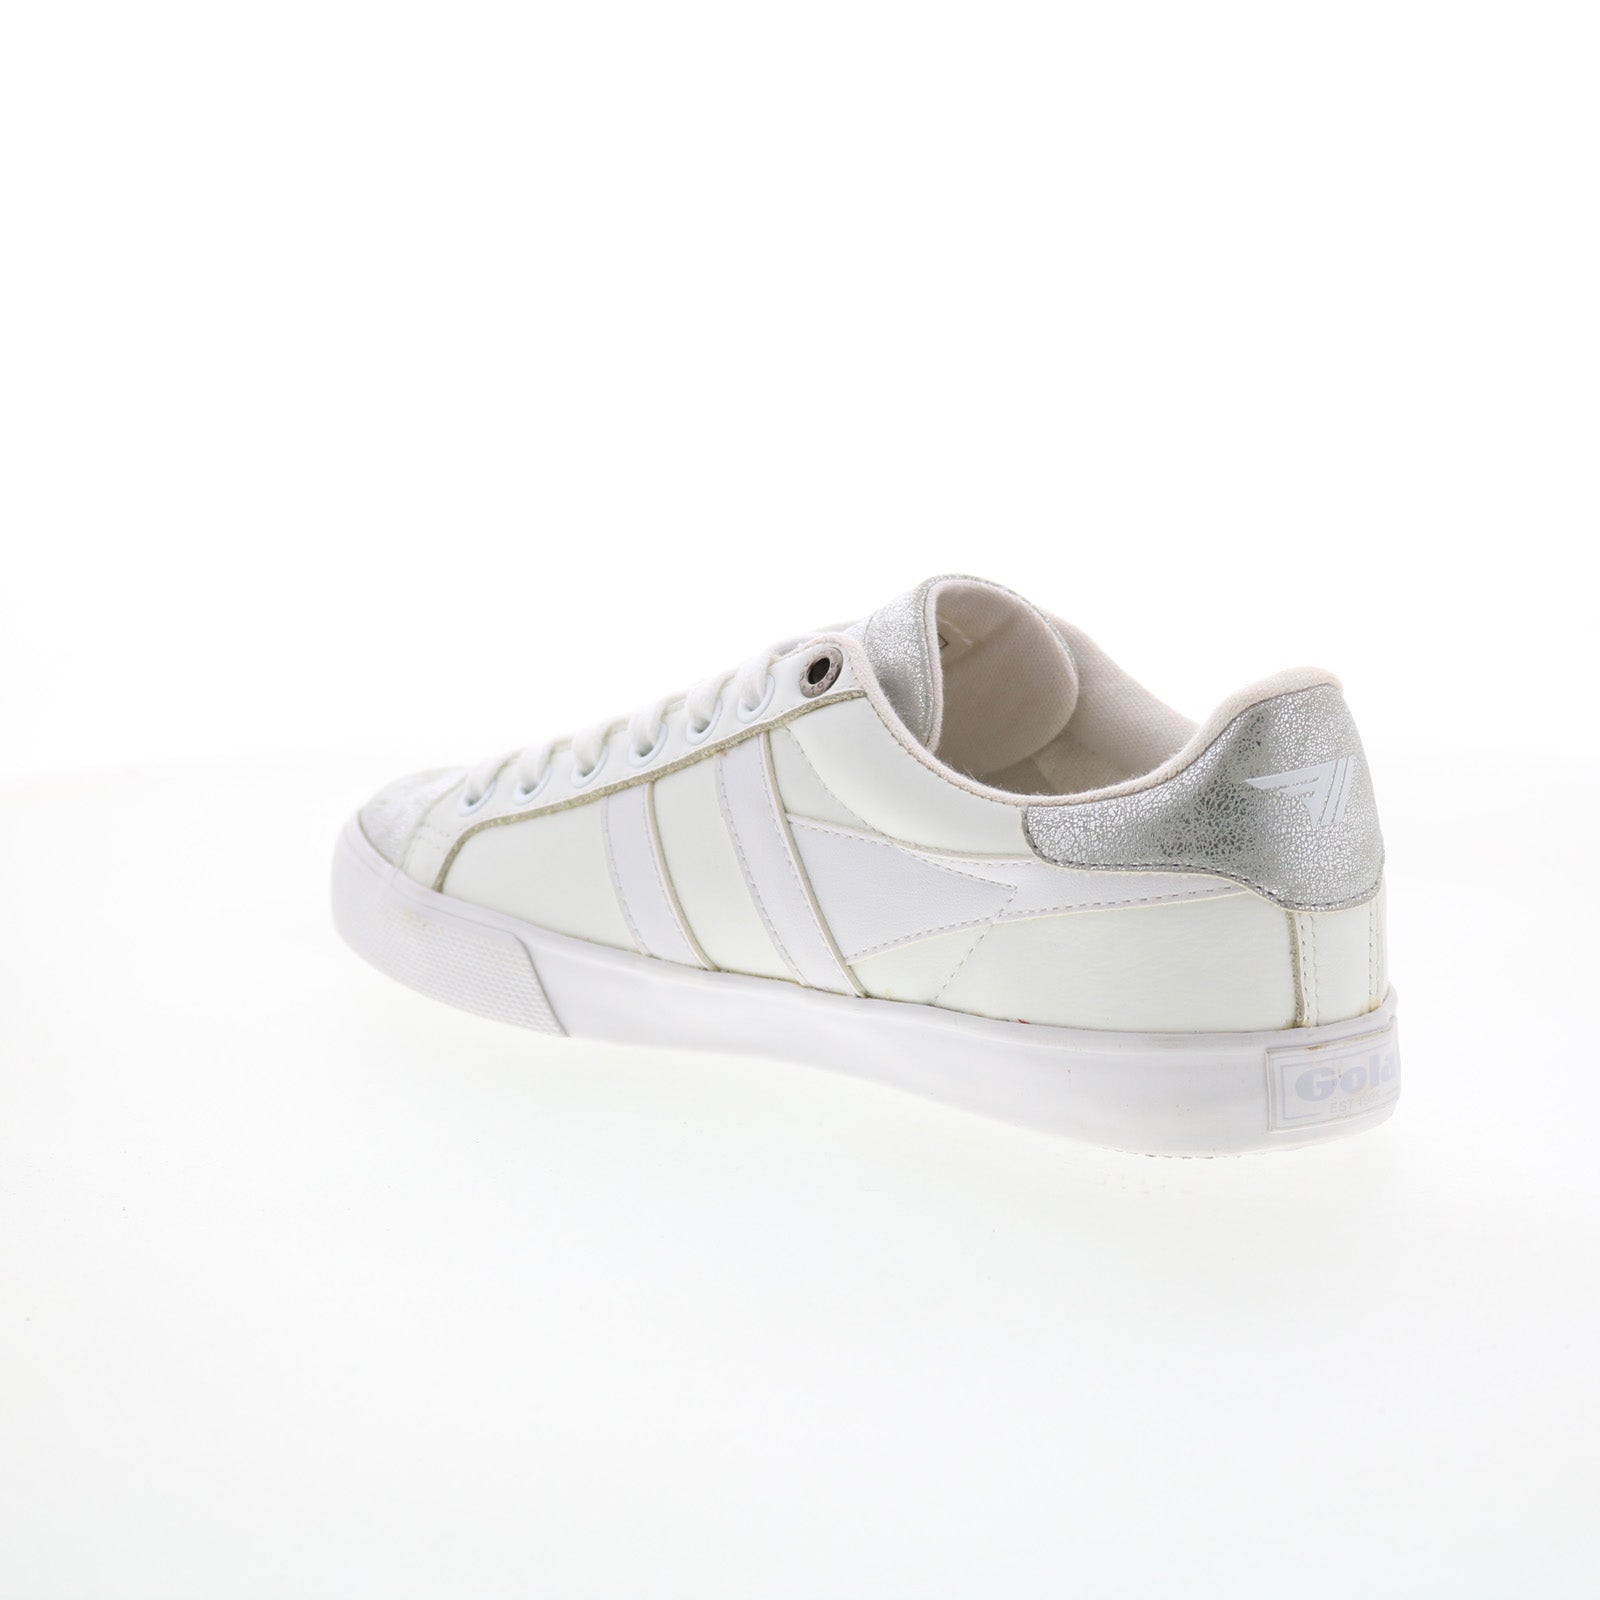 Gola Orchid CLA668 Womens White Leather Lace Up Lifestyle Sneakers Shoes